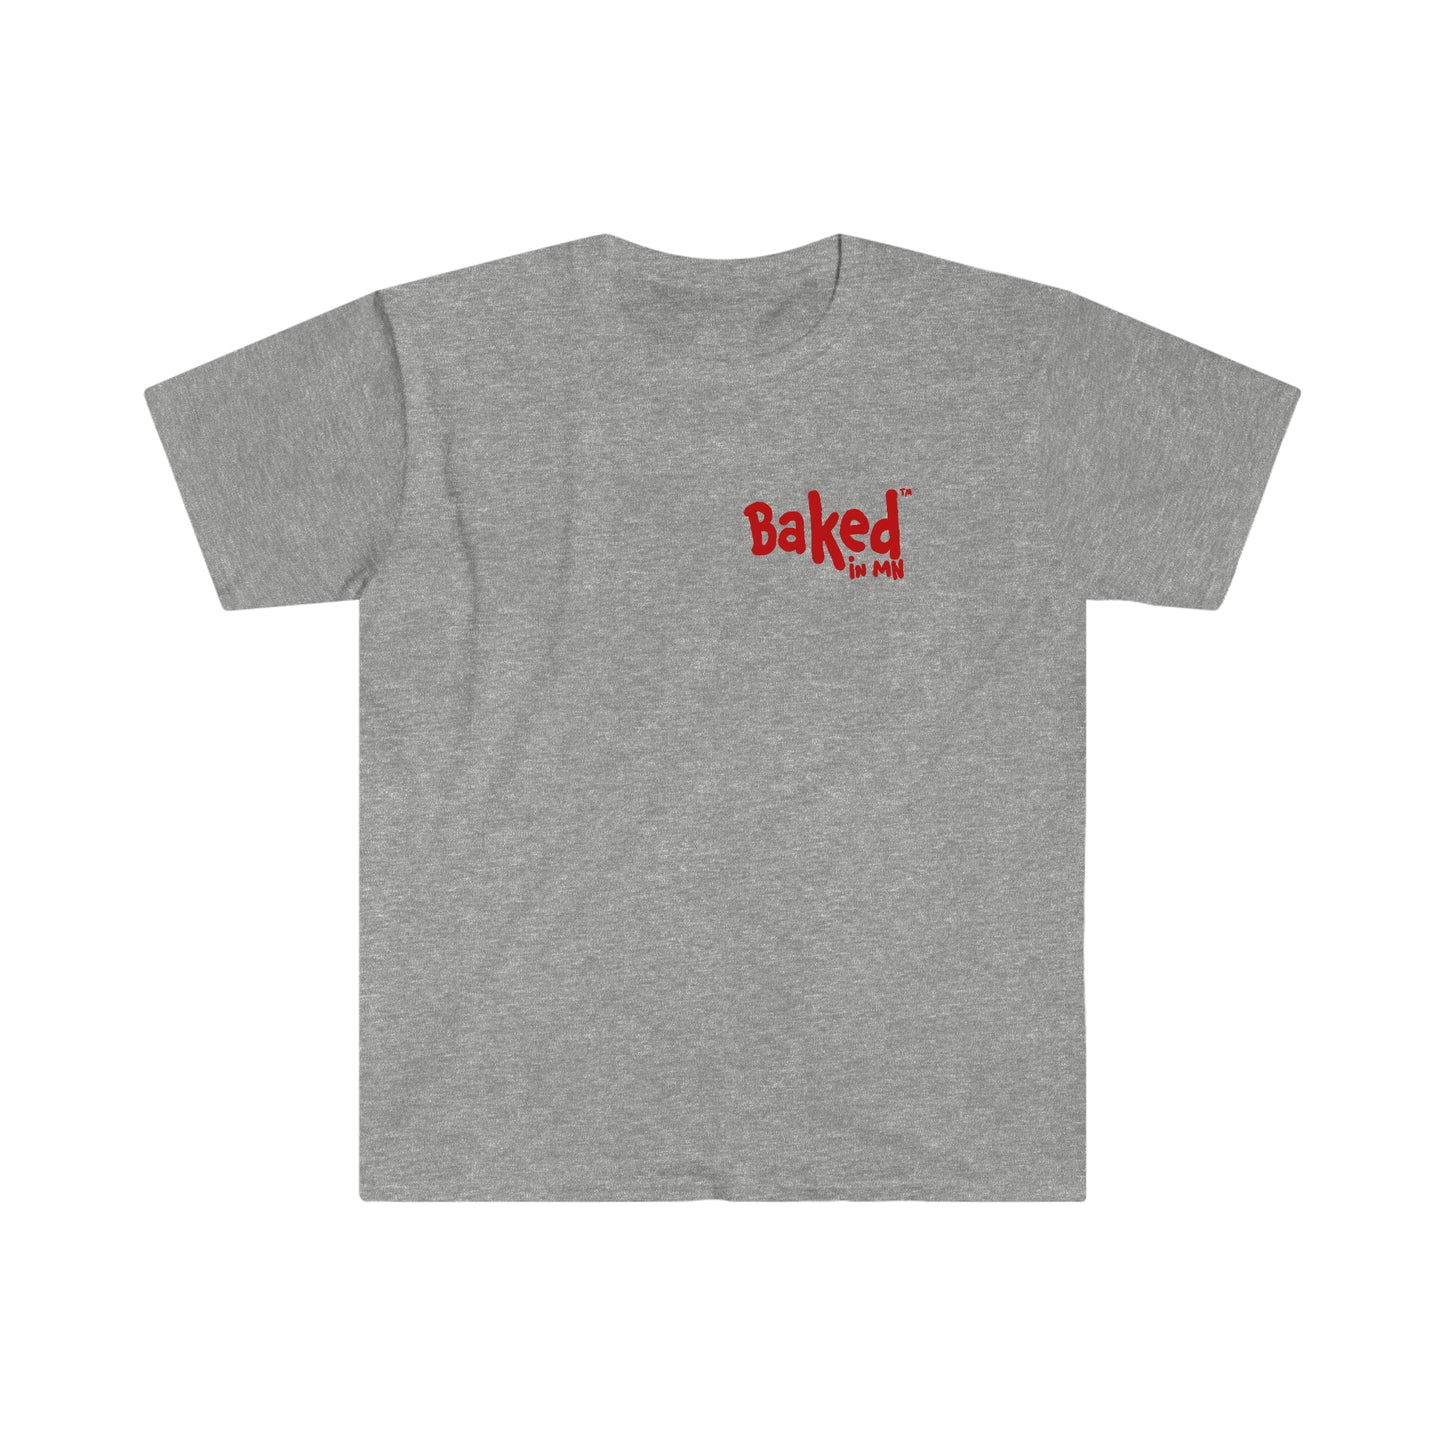 Baked in MN Unisex Soft T-Shirt